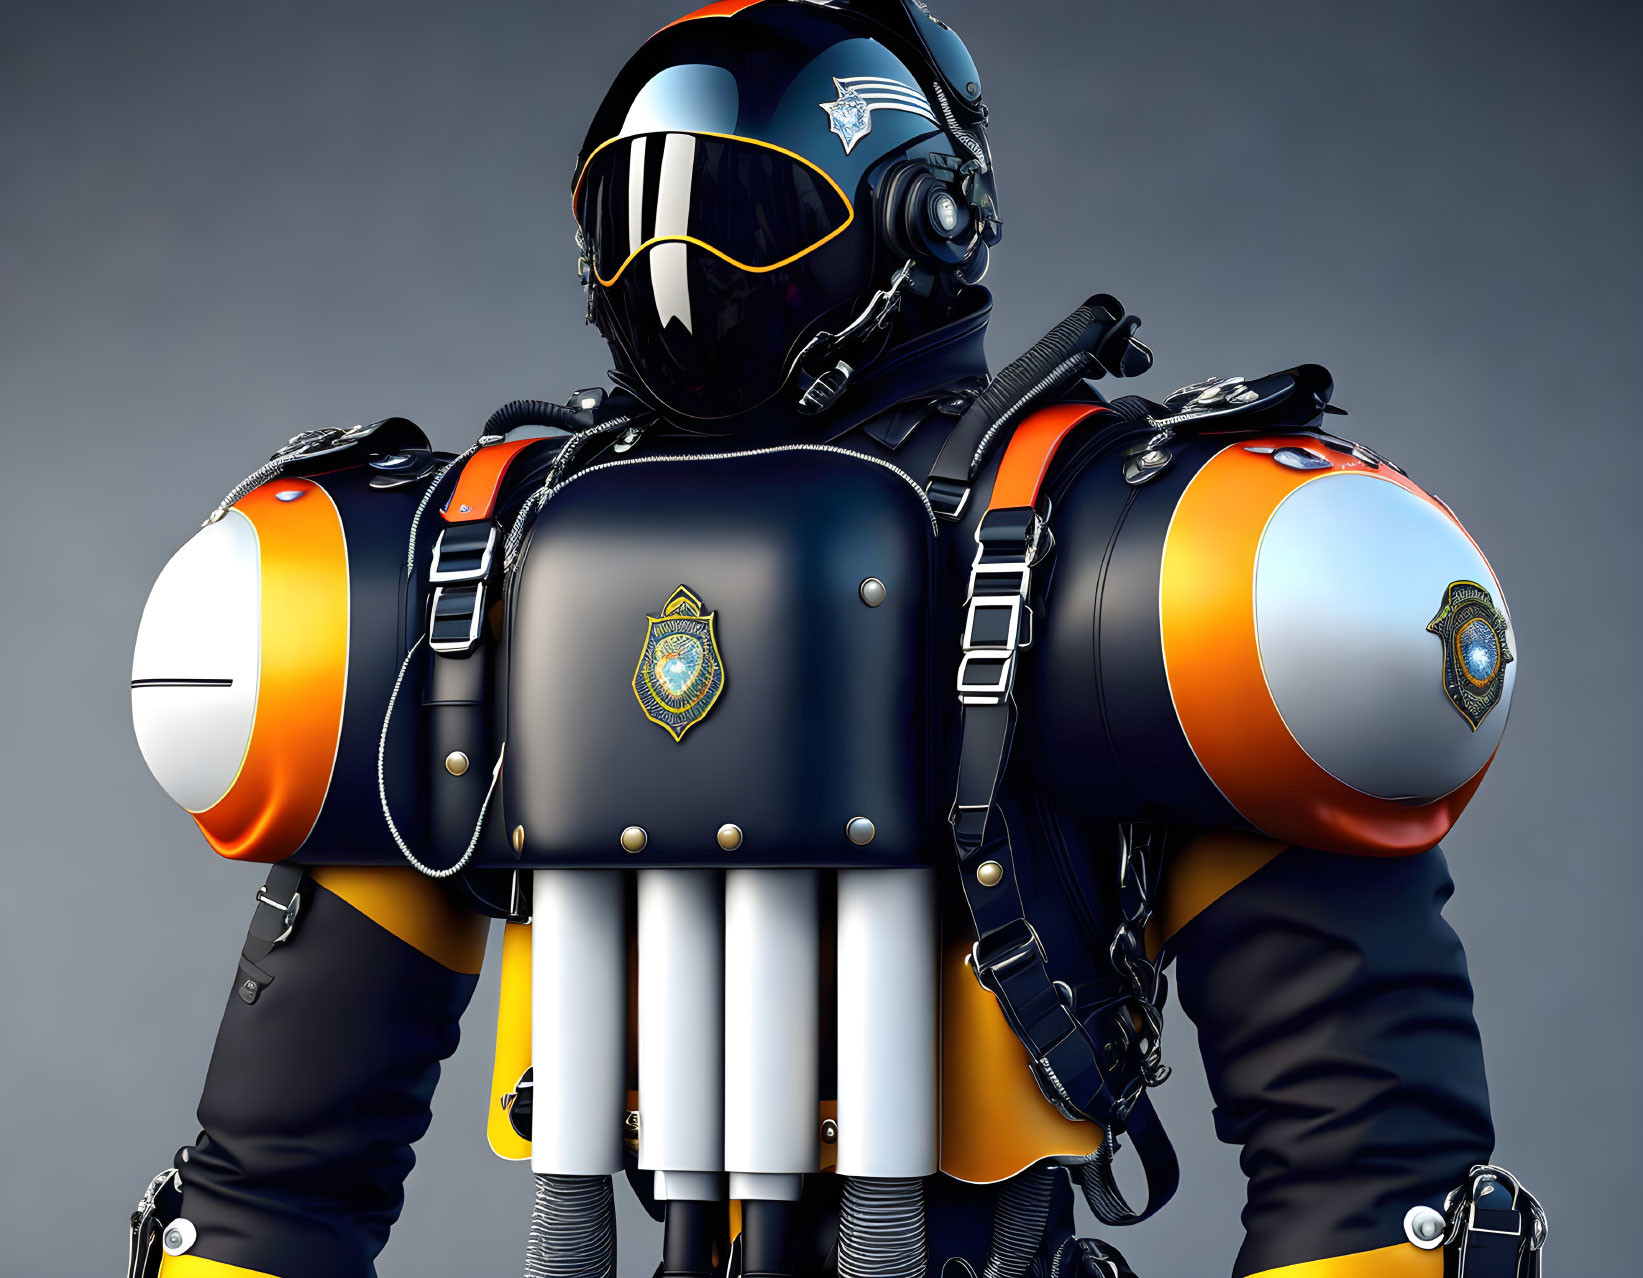 Future emergency police jet pack